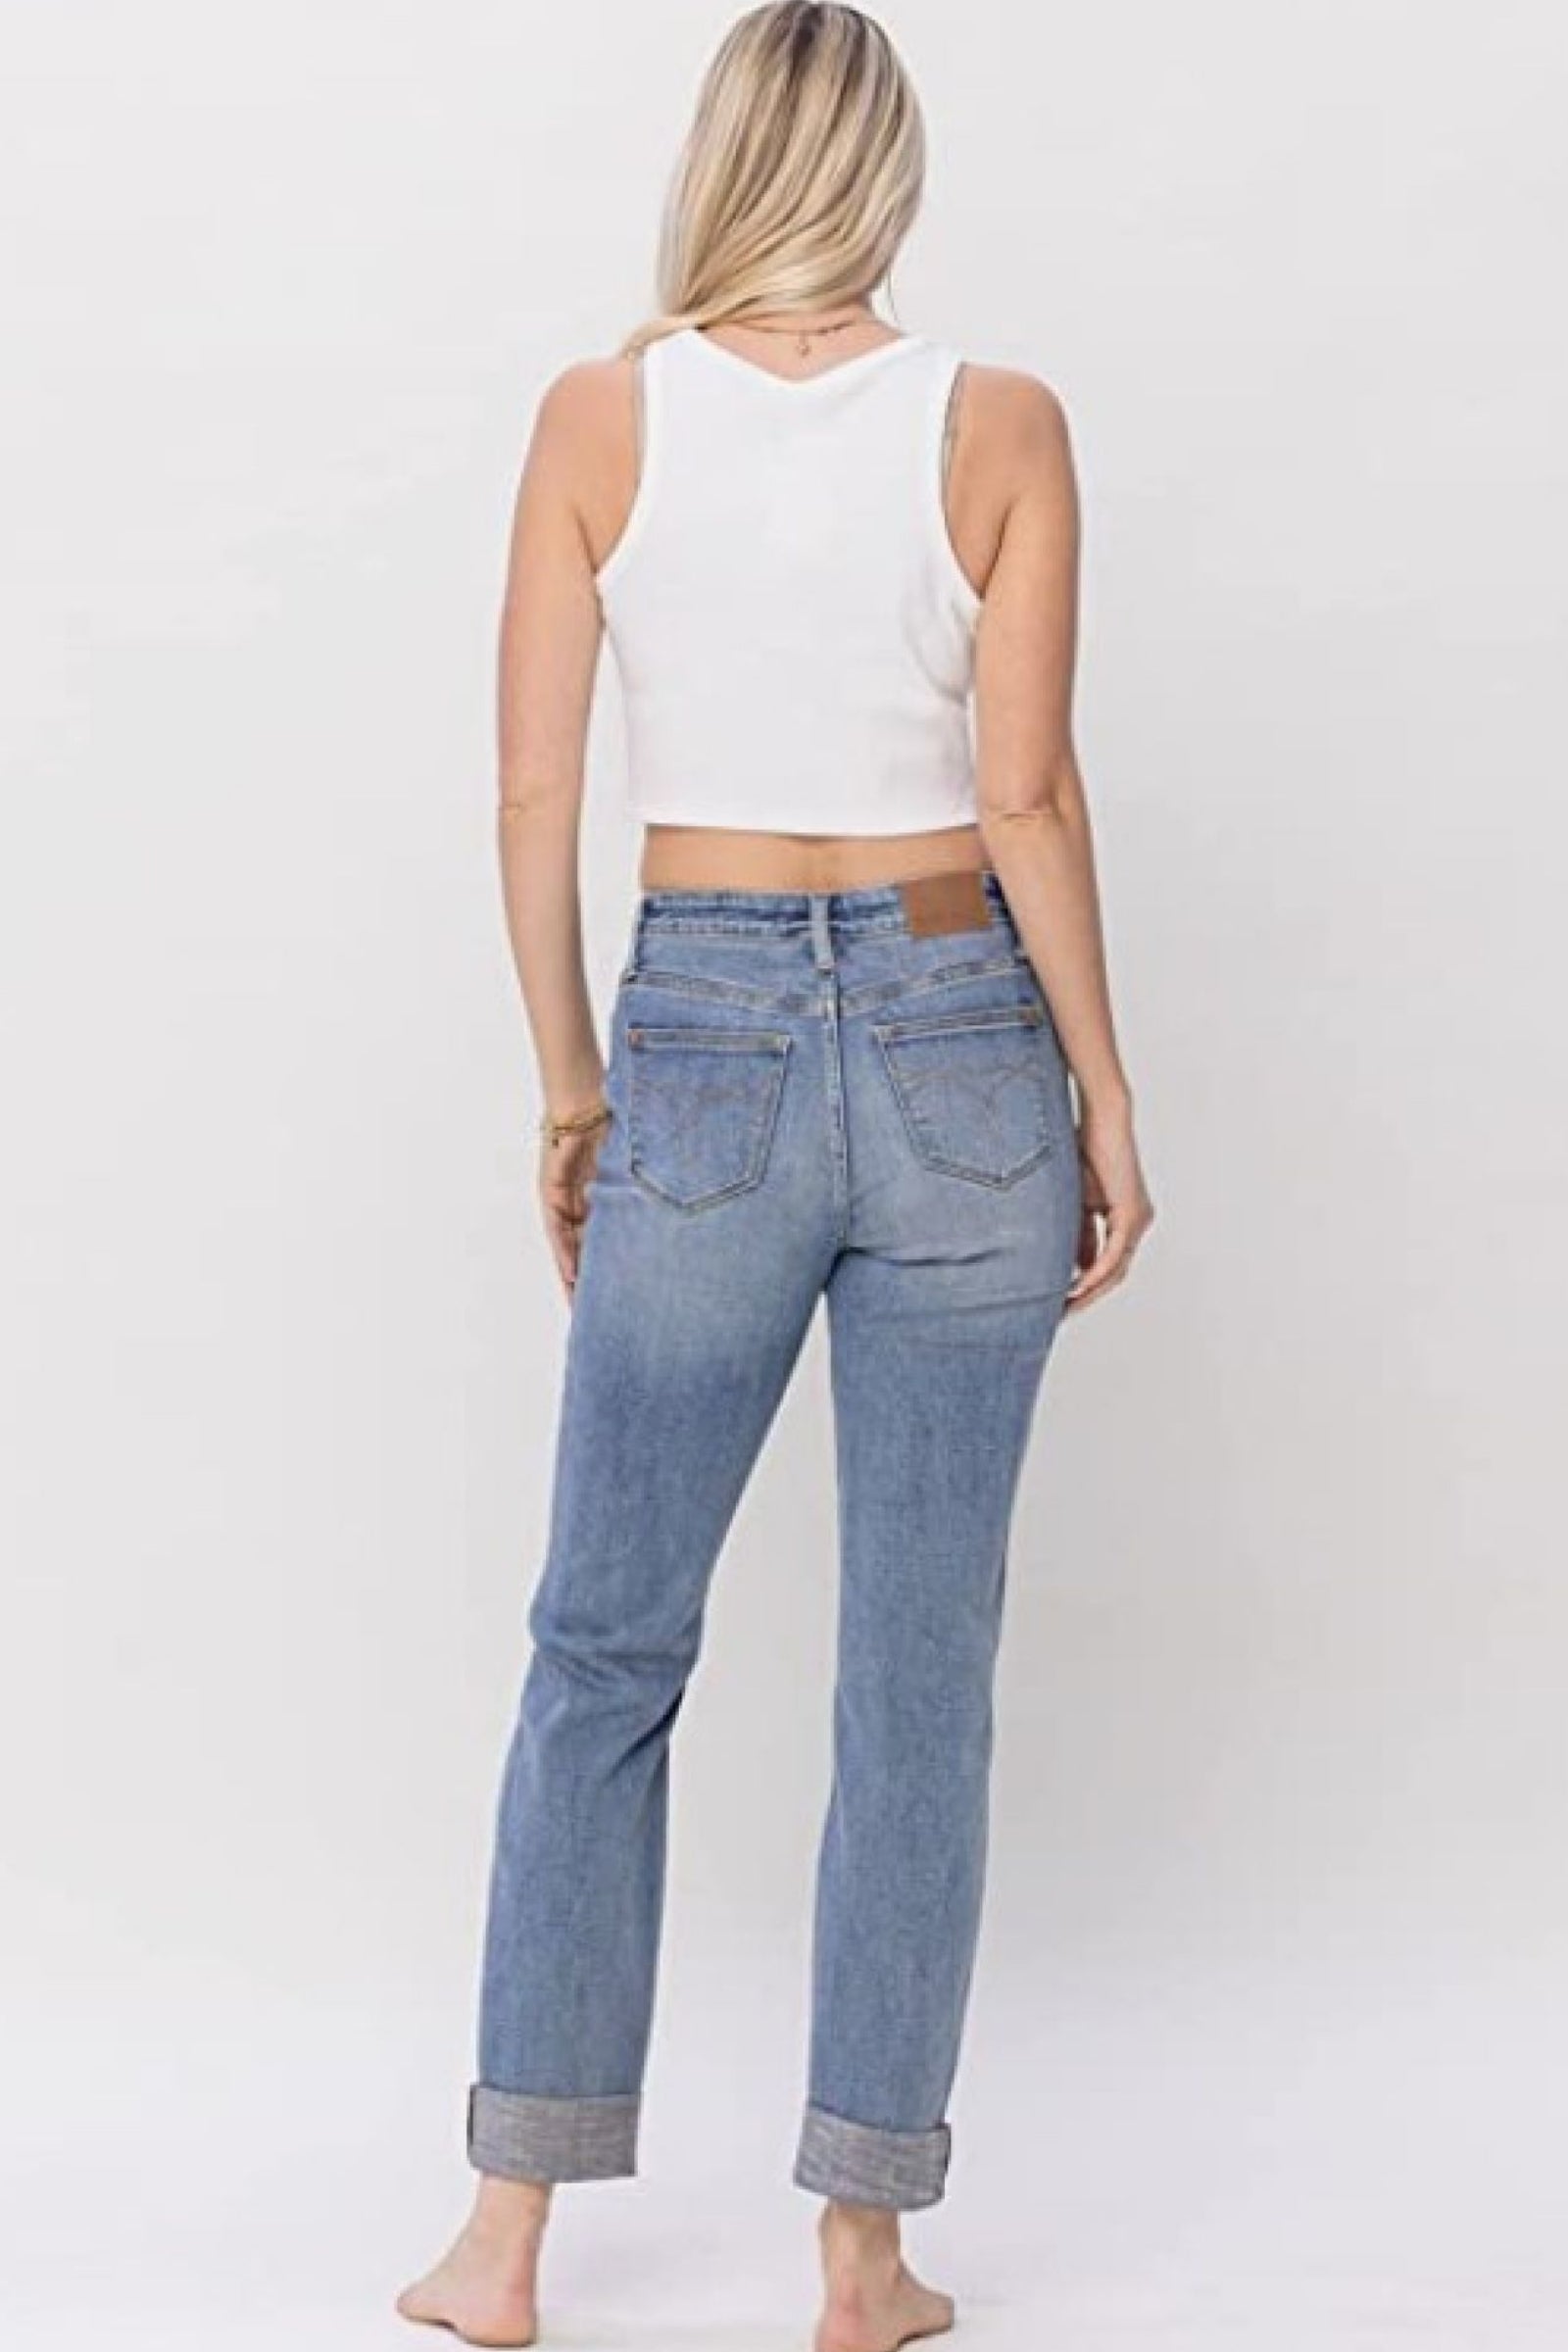 Back View, Judy Blue, Mid-Rise Boyfriend Fit with Destroyed Knee, Cuffed Jeans Style 88605